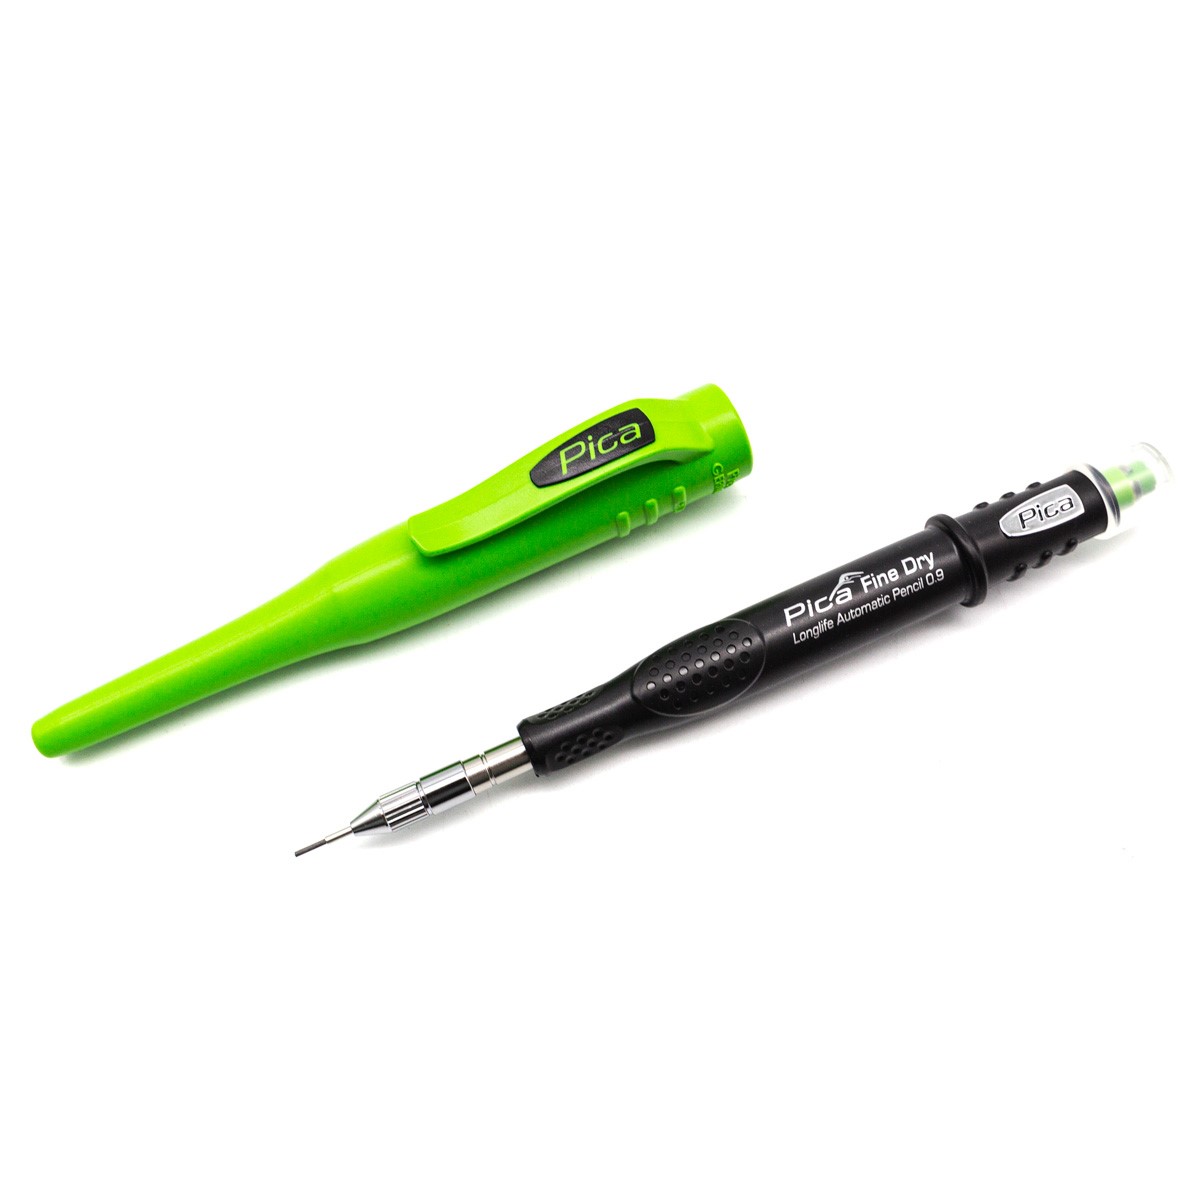 Pica Fine Dry Longlife Automatic Pencil Starter Set